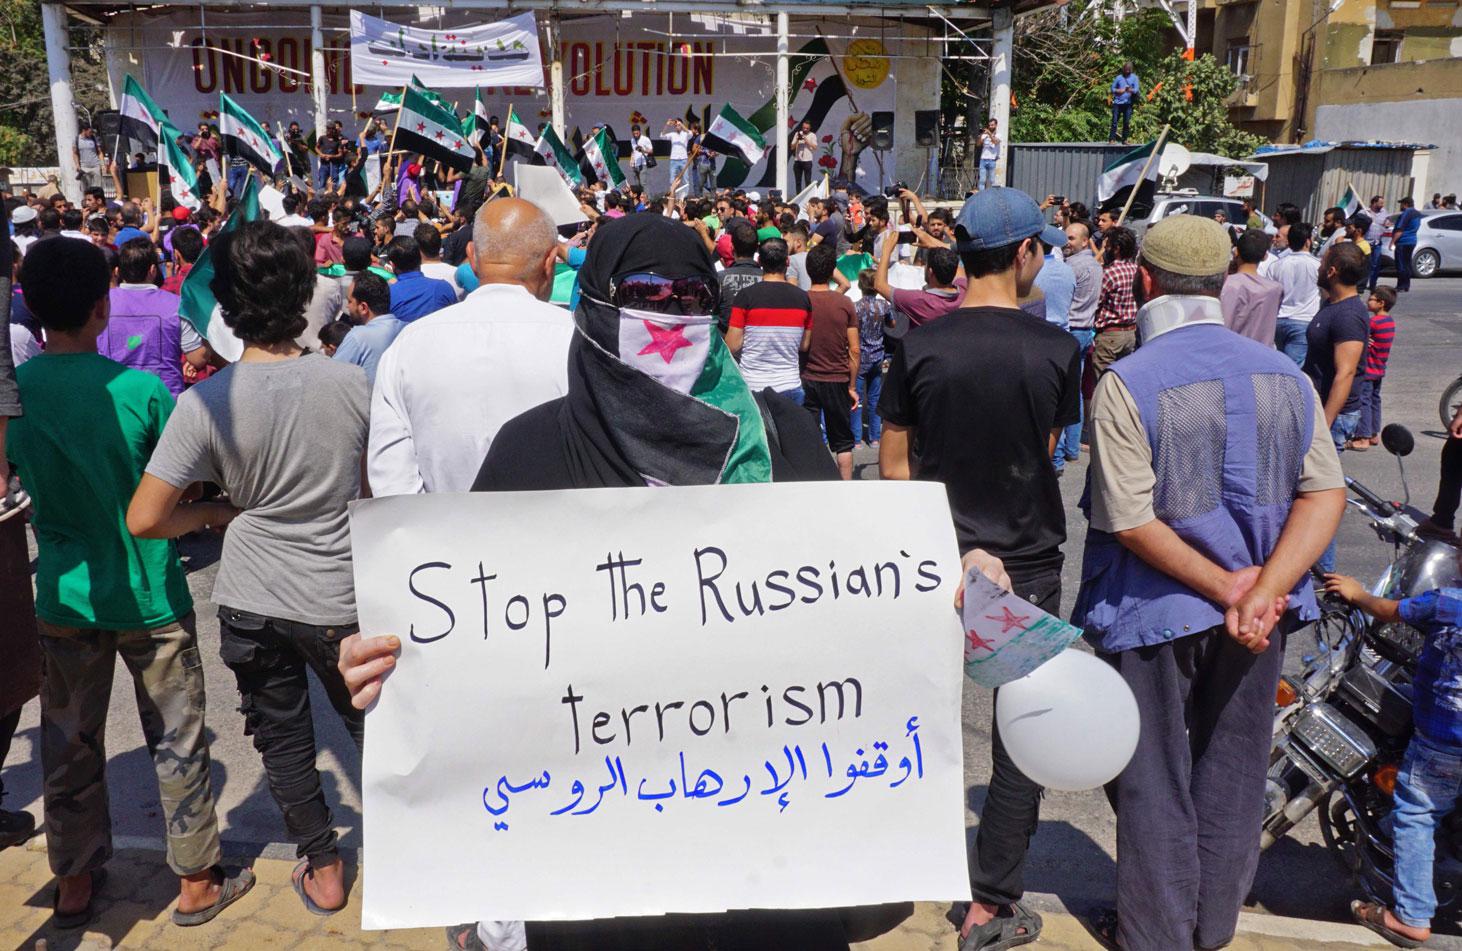 A woman holds up a sign against Russia during a demonstration in Idlib on Sept. 6